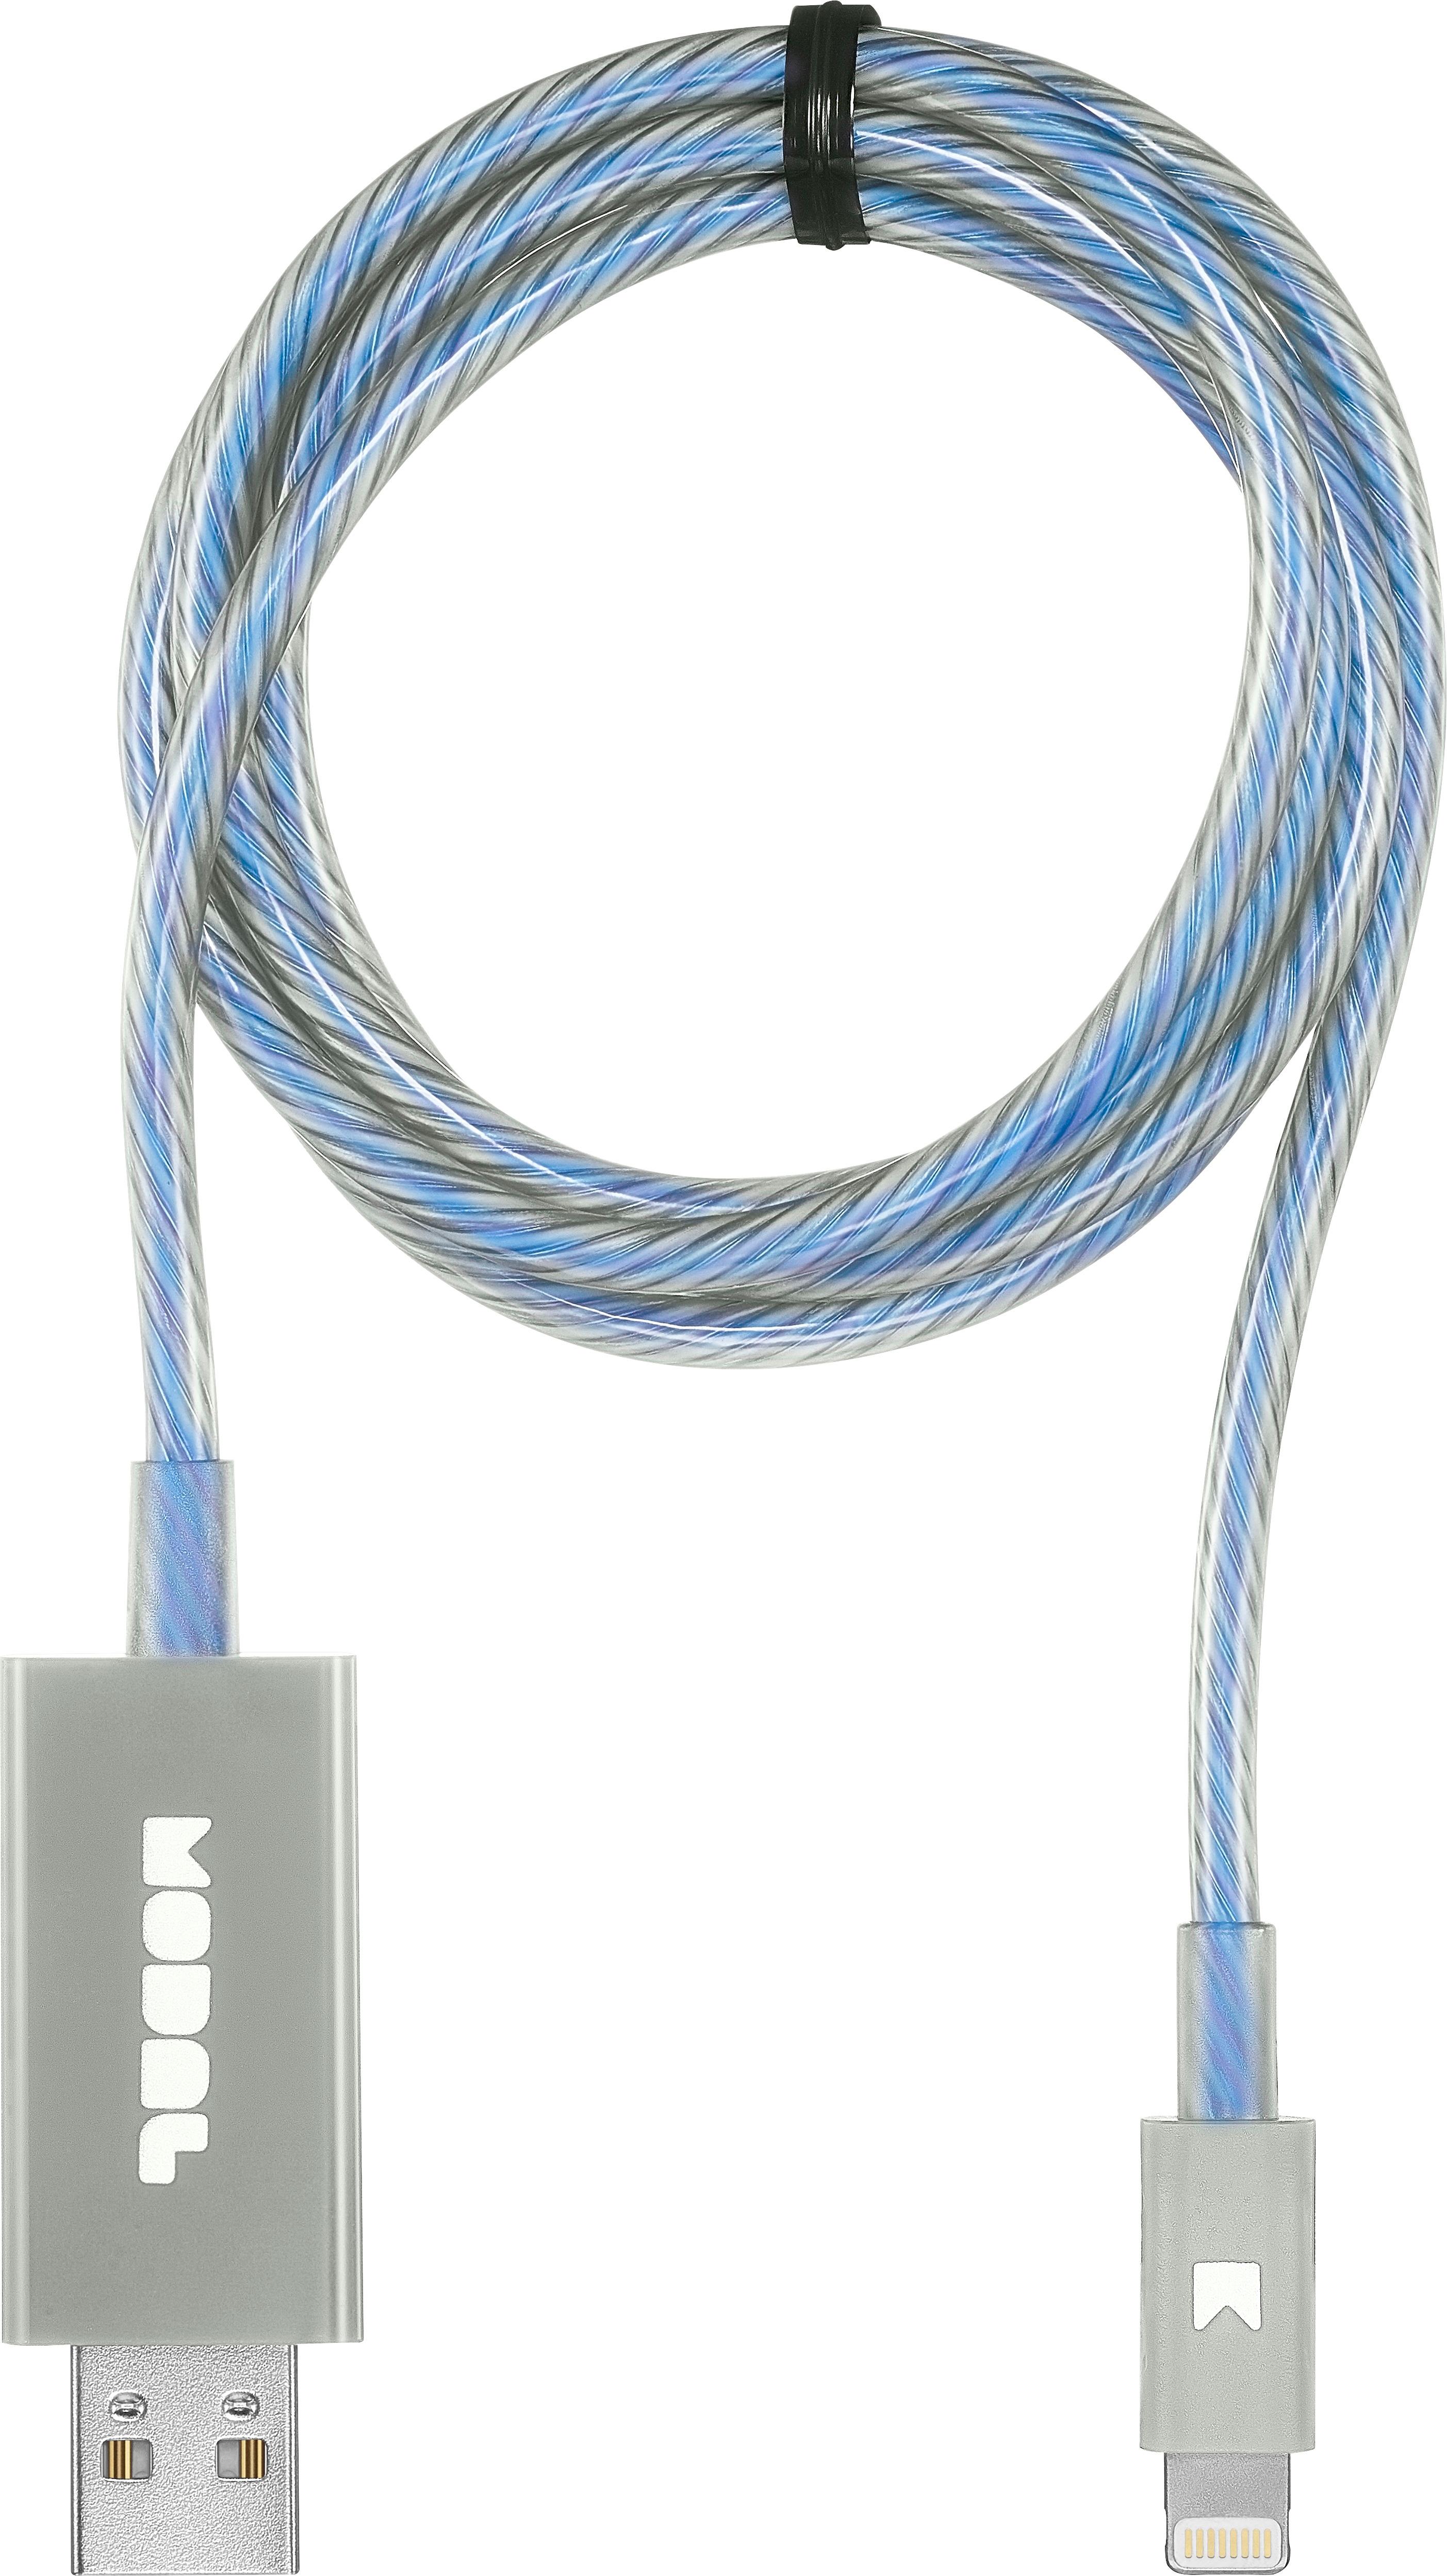 Buy Apple MQUE2ZM/A 1 m USB 2.0 to Lightning Cable at Best Price on  Reliance Digital